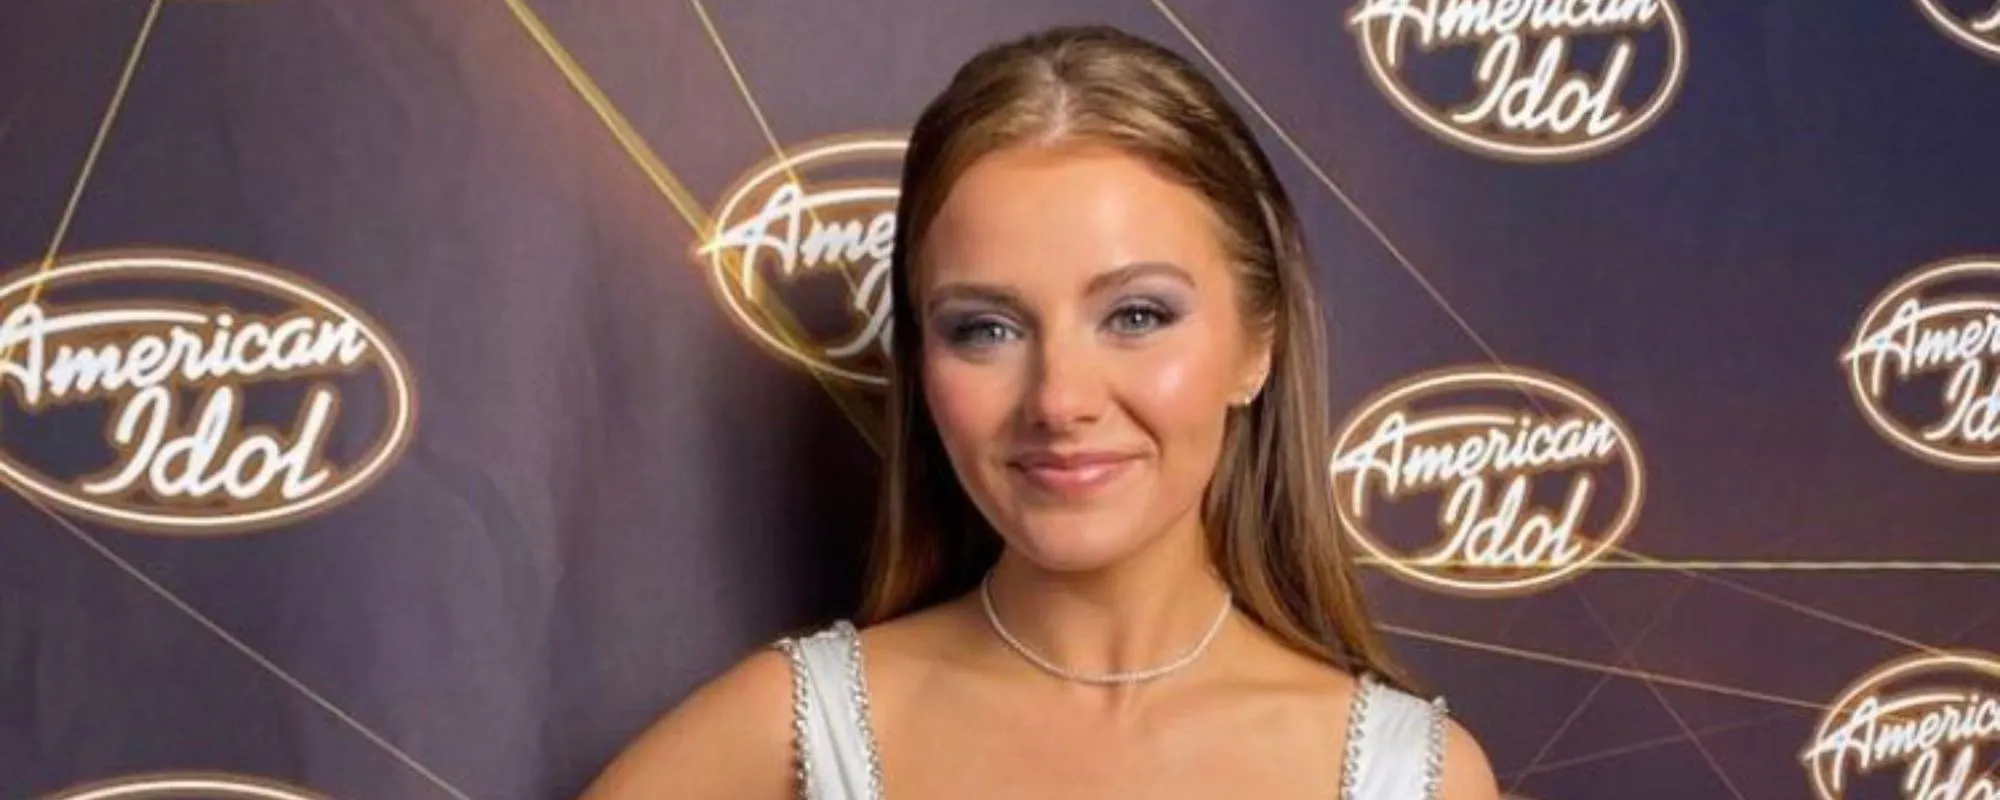 What Were the Top Songs from the Year ’American Idol’ Star Emmy Russell Born?